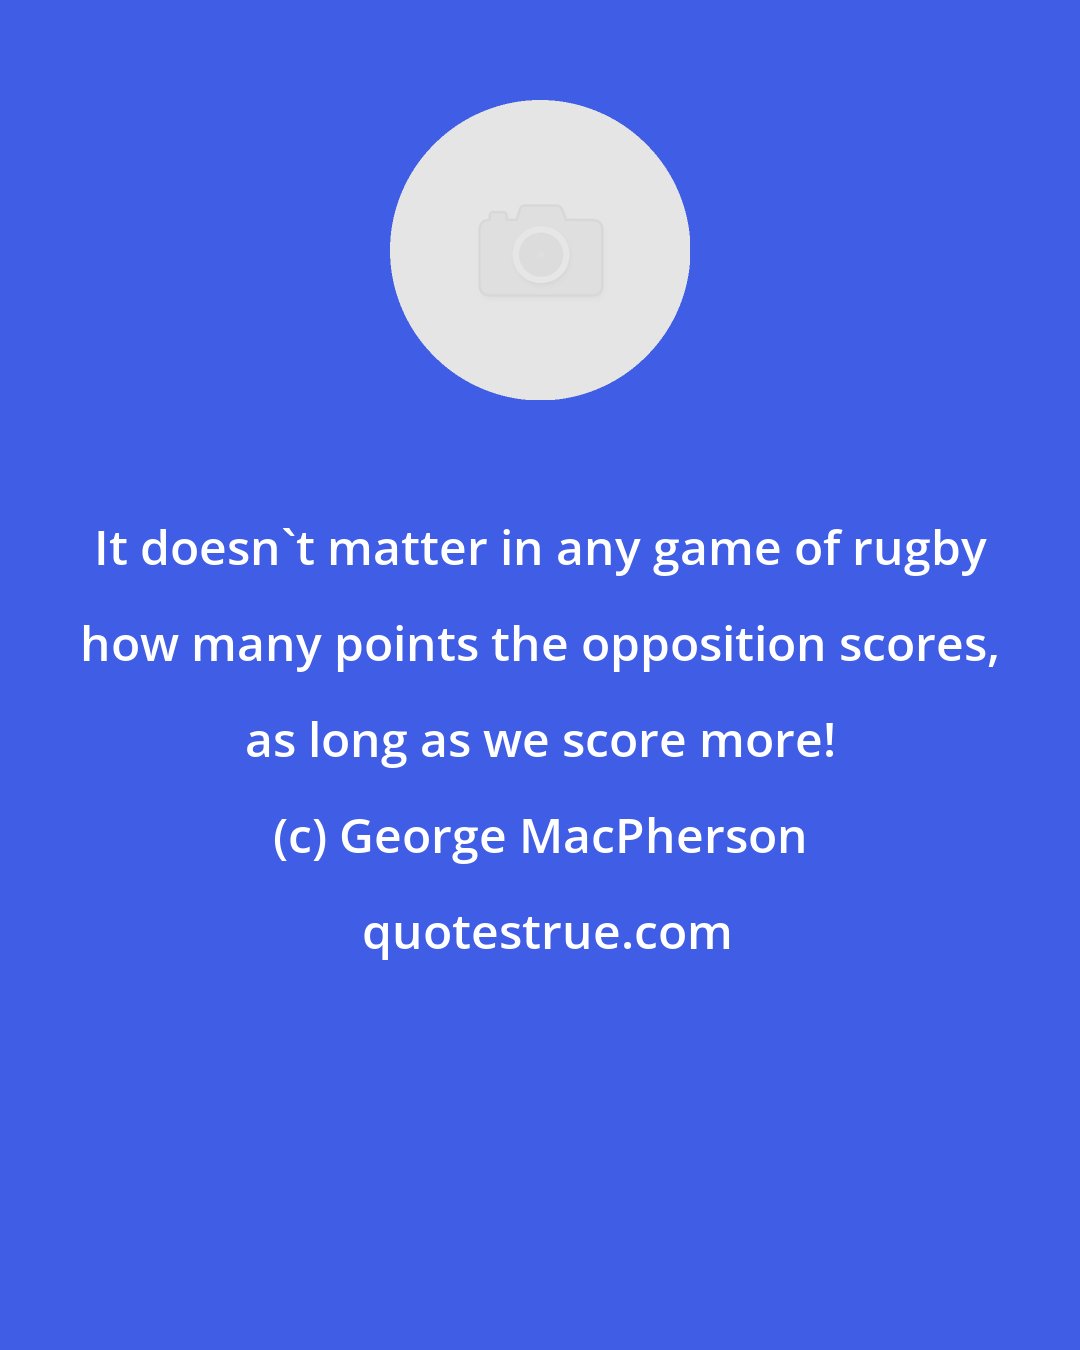 George MacPherson: It doesn't matter in any game of rugby how many points the opposition scores, as long as we score more!